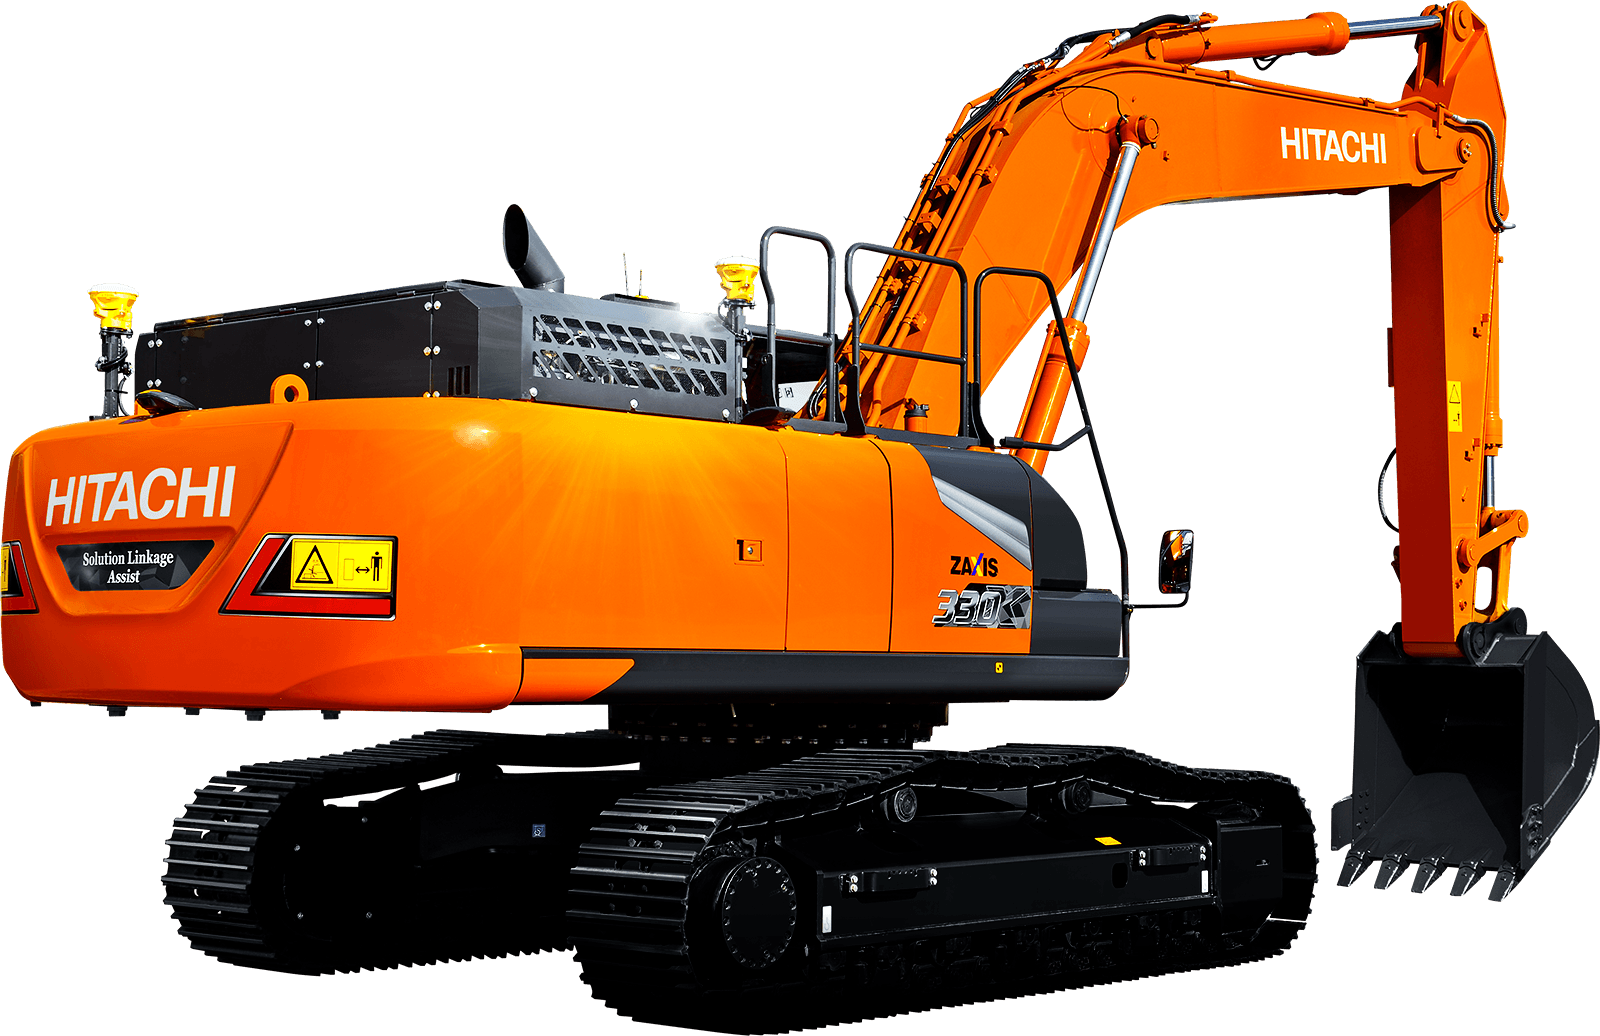 ZAXIS SERIES 新型ZAXIS-7シリーズが、新登場 その手で、革新を操れ！ Be an Innovator 日立建機